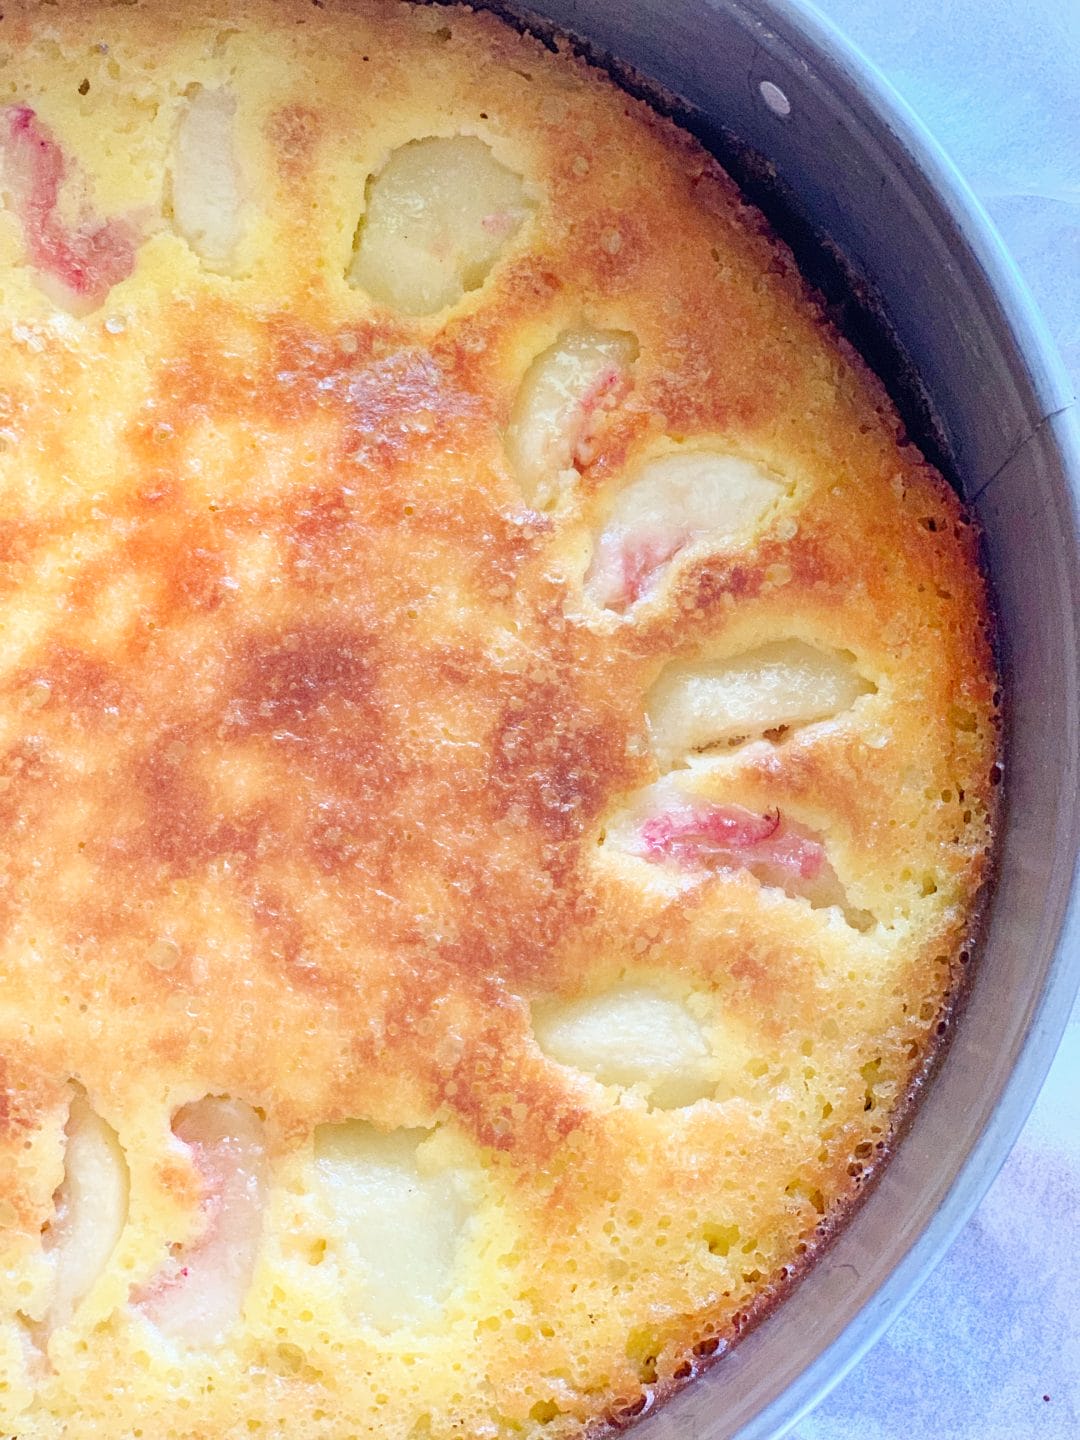 Picture of peach cake in the baking tray